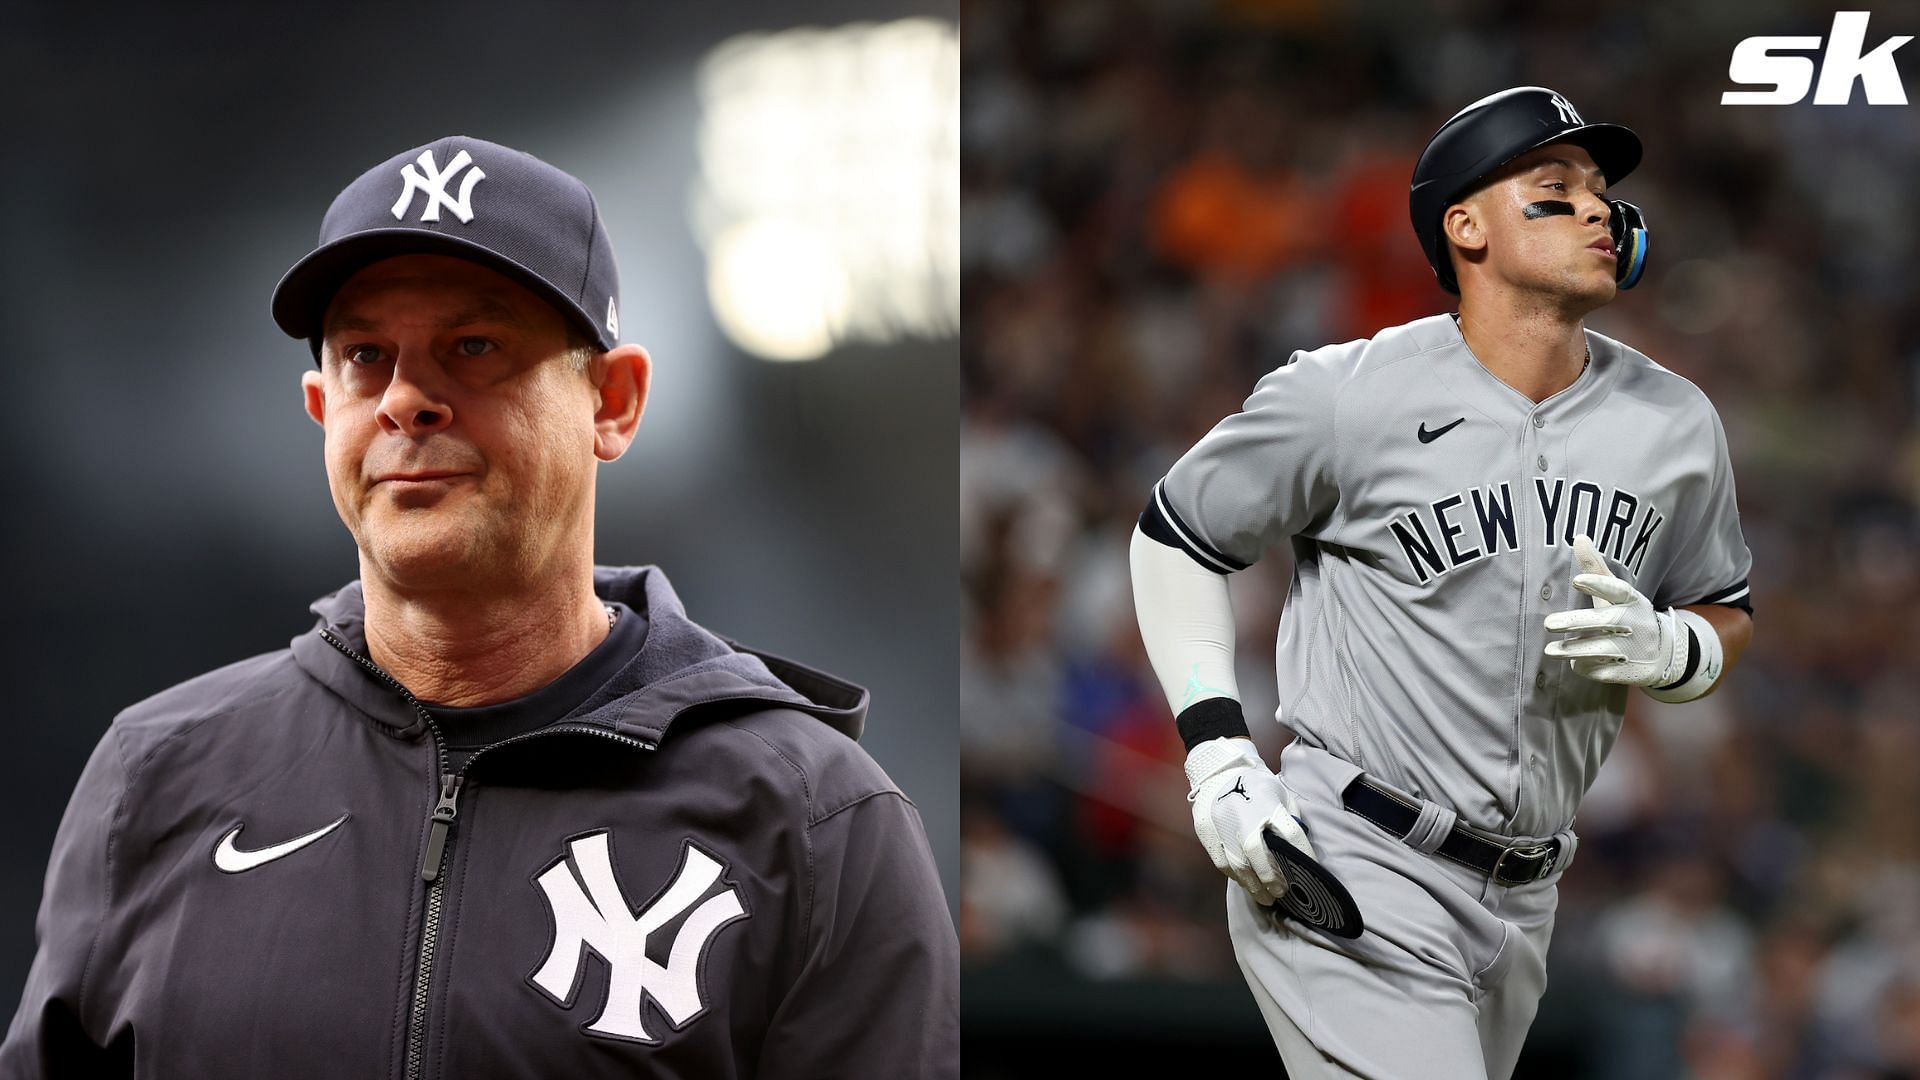 Aaron Boone and Aaron Judge of the New York Yankees